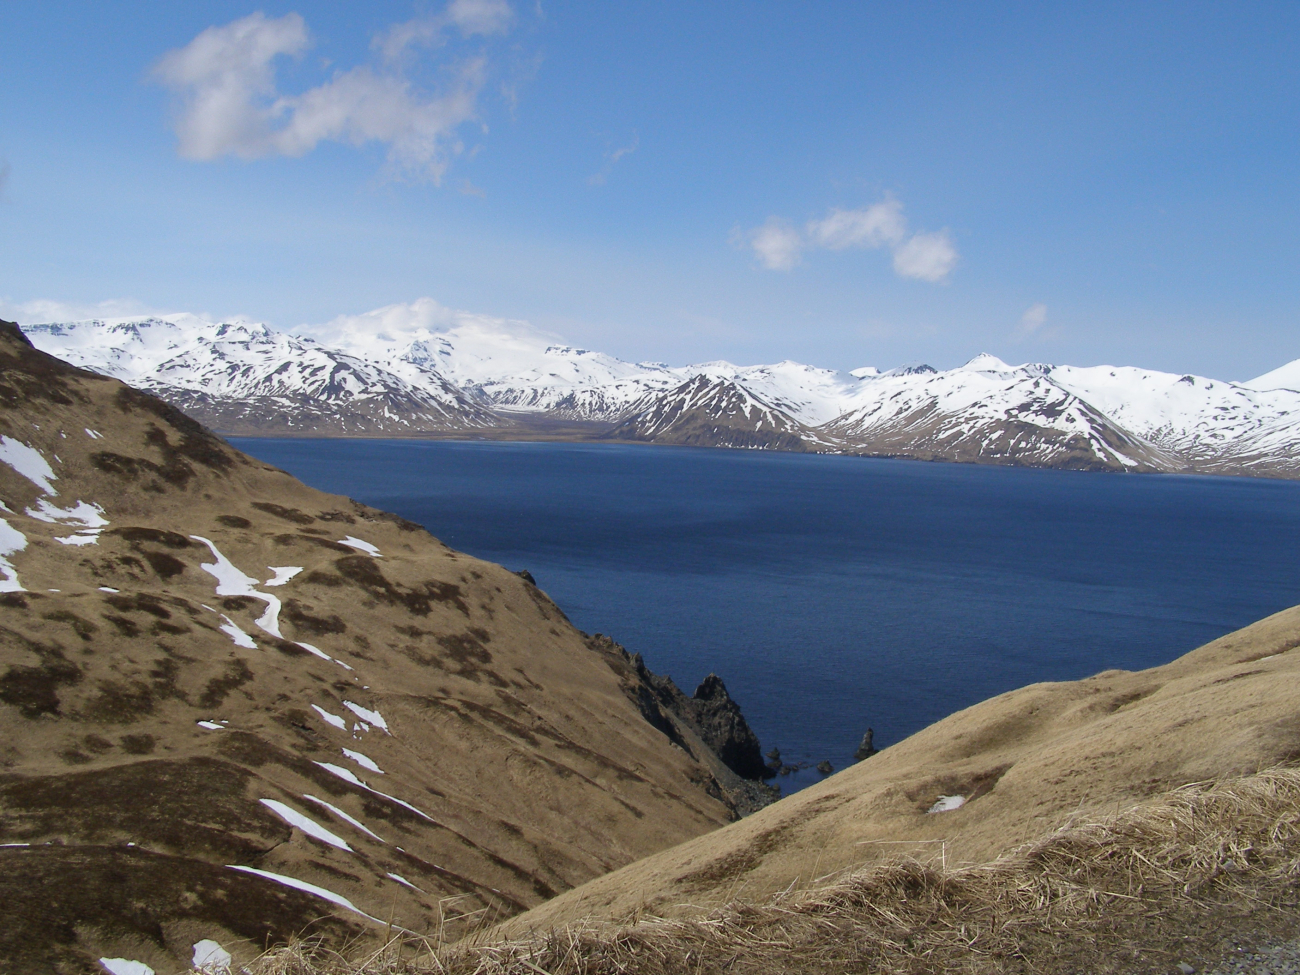 A view of an arm of the  ocean from above Dutch Harbor